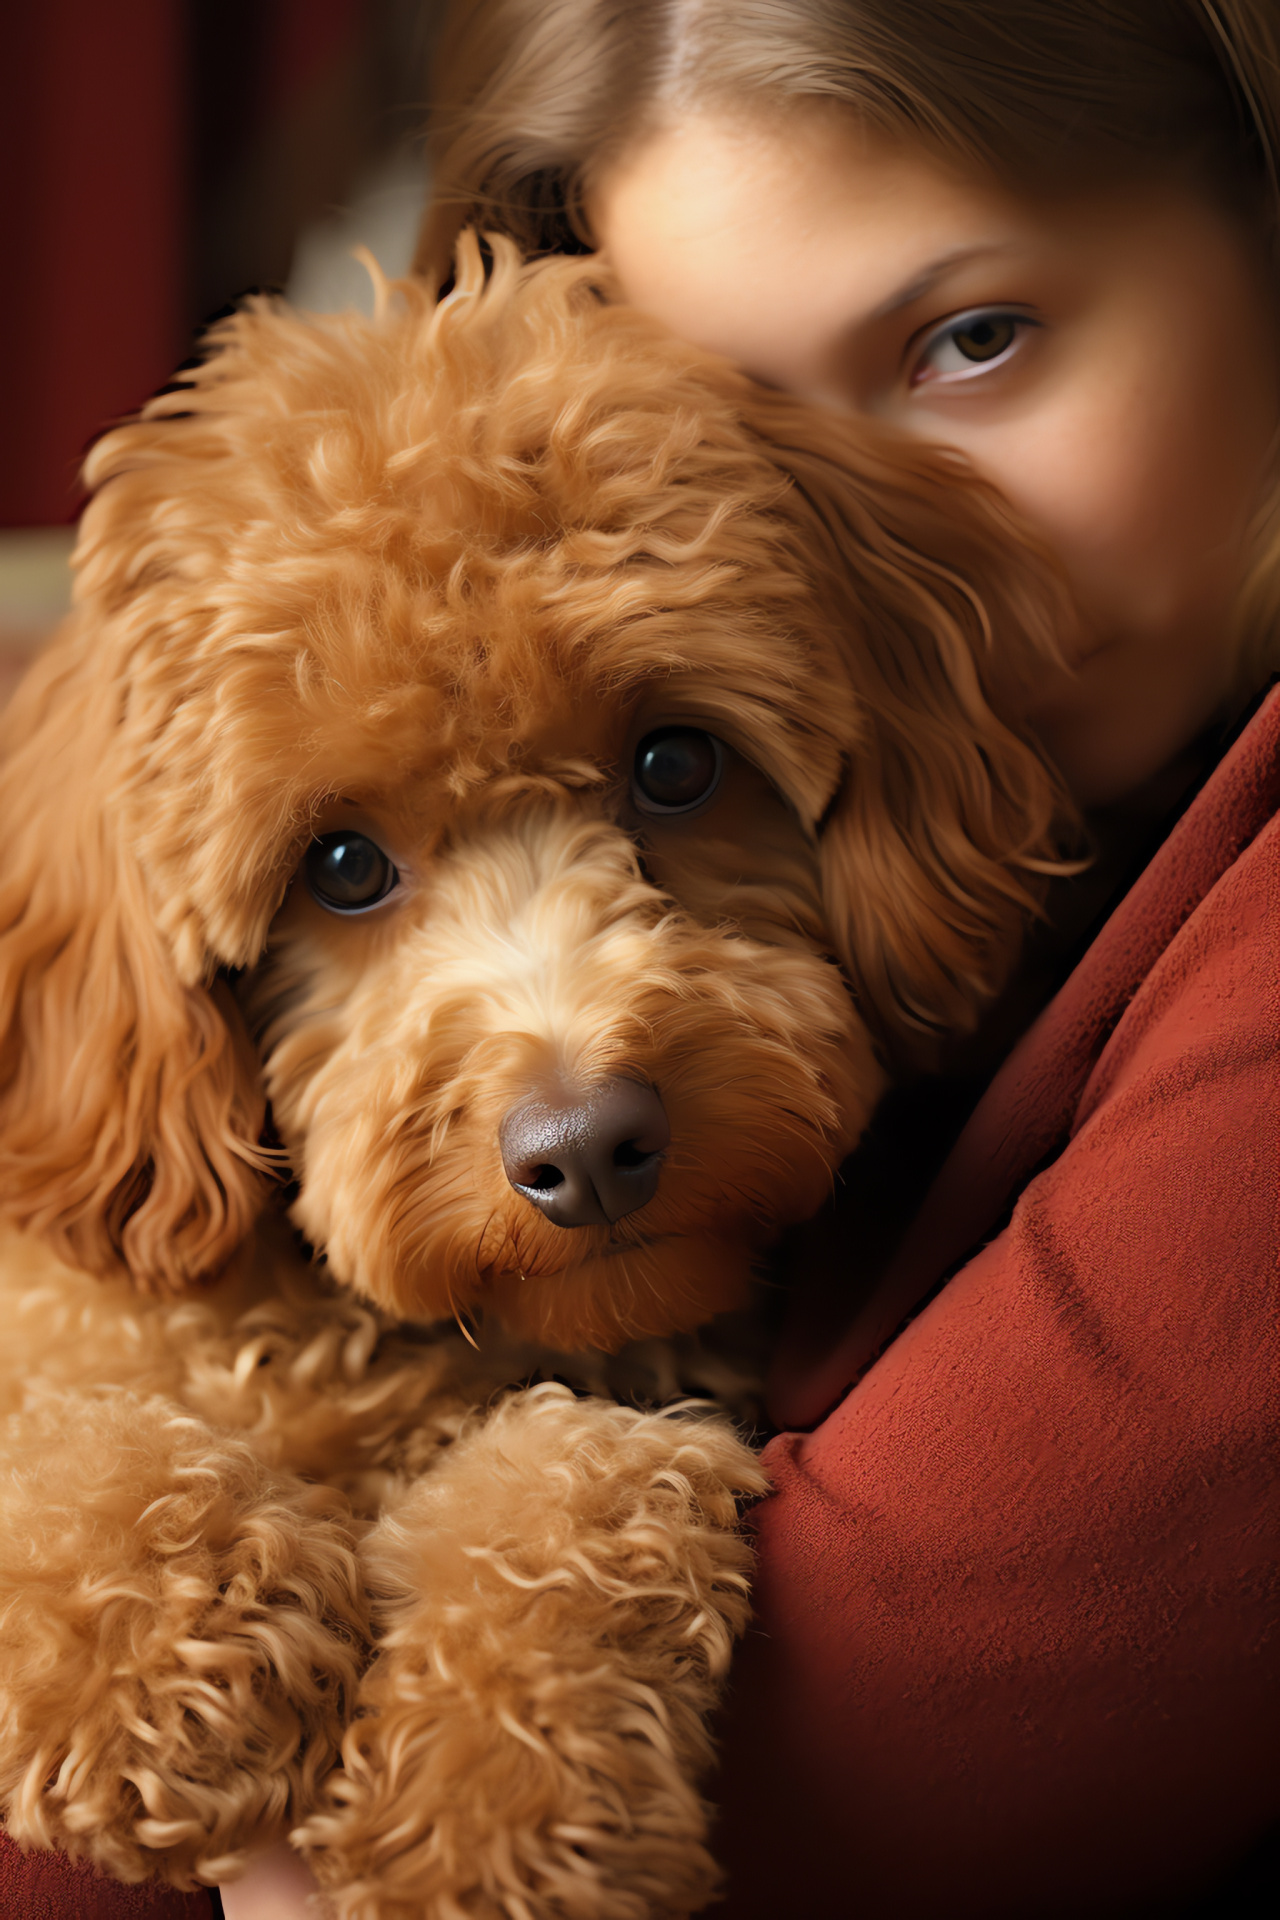 Elegant dog breed, Intelligent poodle, Loving pet, Red furry companion, Homely ambiance, HD Phone Wallpaper